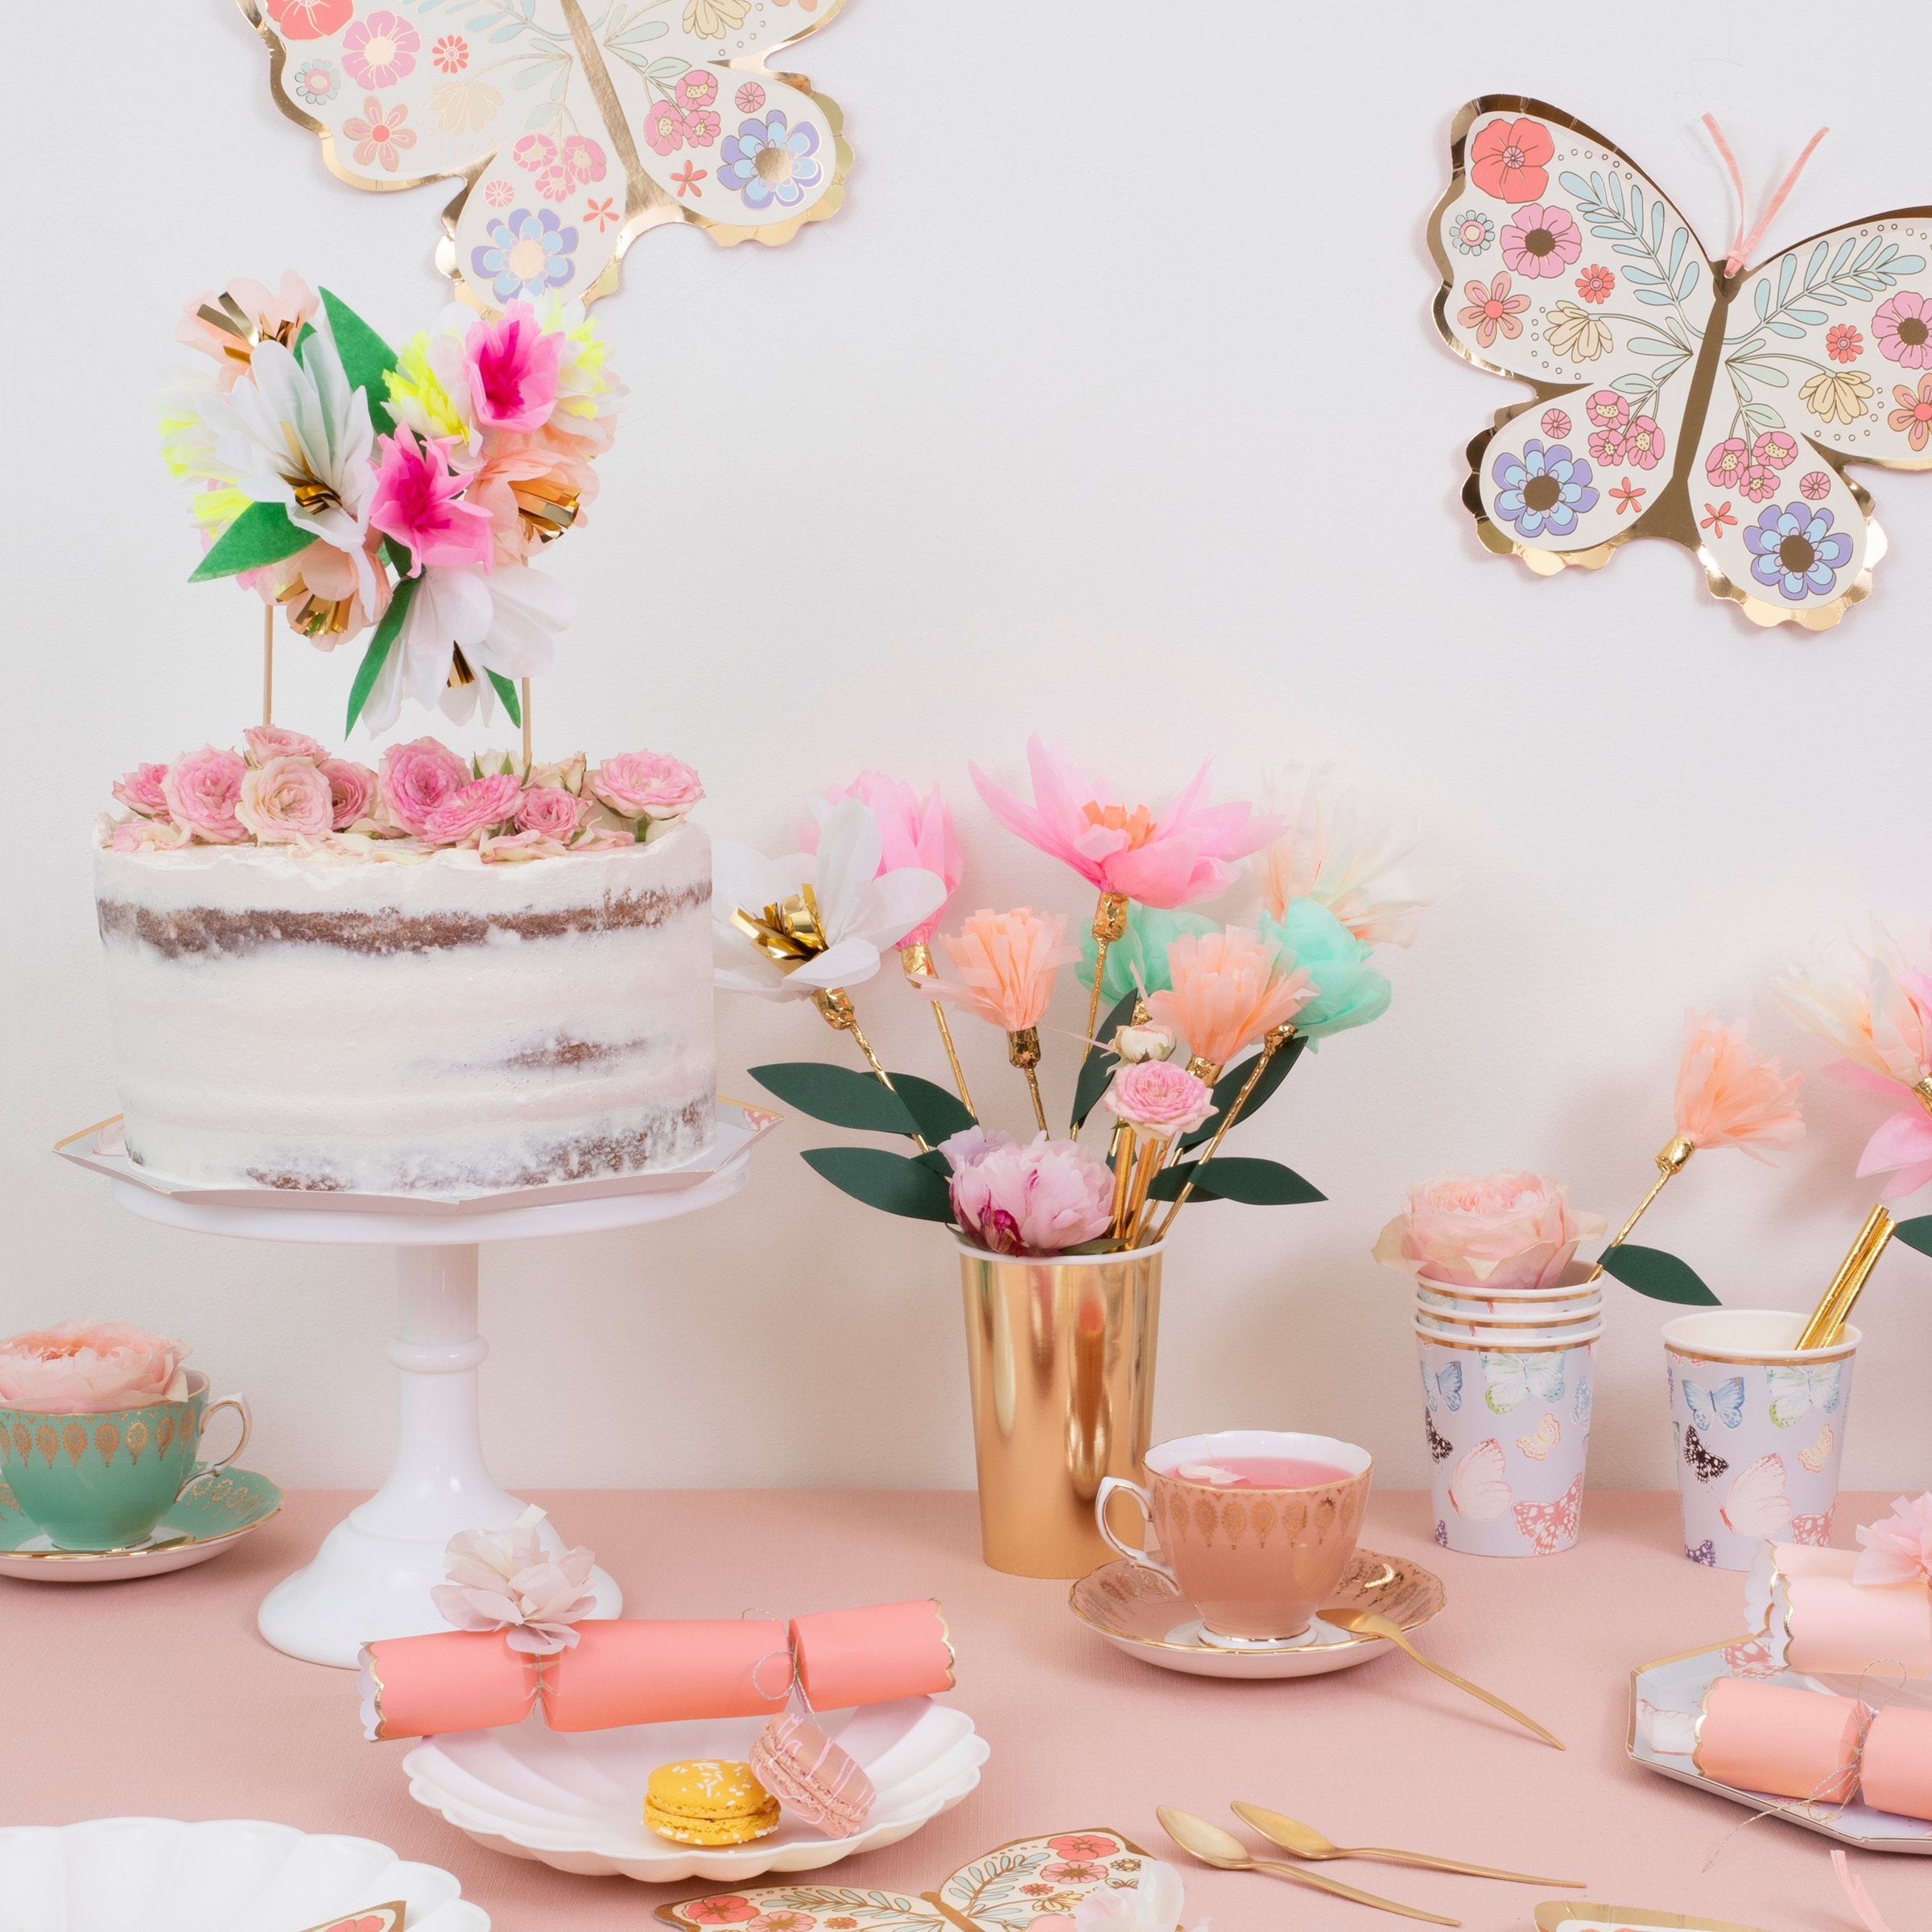 Turn a celebratory cake into a beautiful floral work of art with our fabulous cake topper crafted with colourful paper flowers.